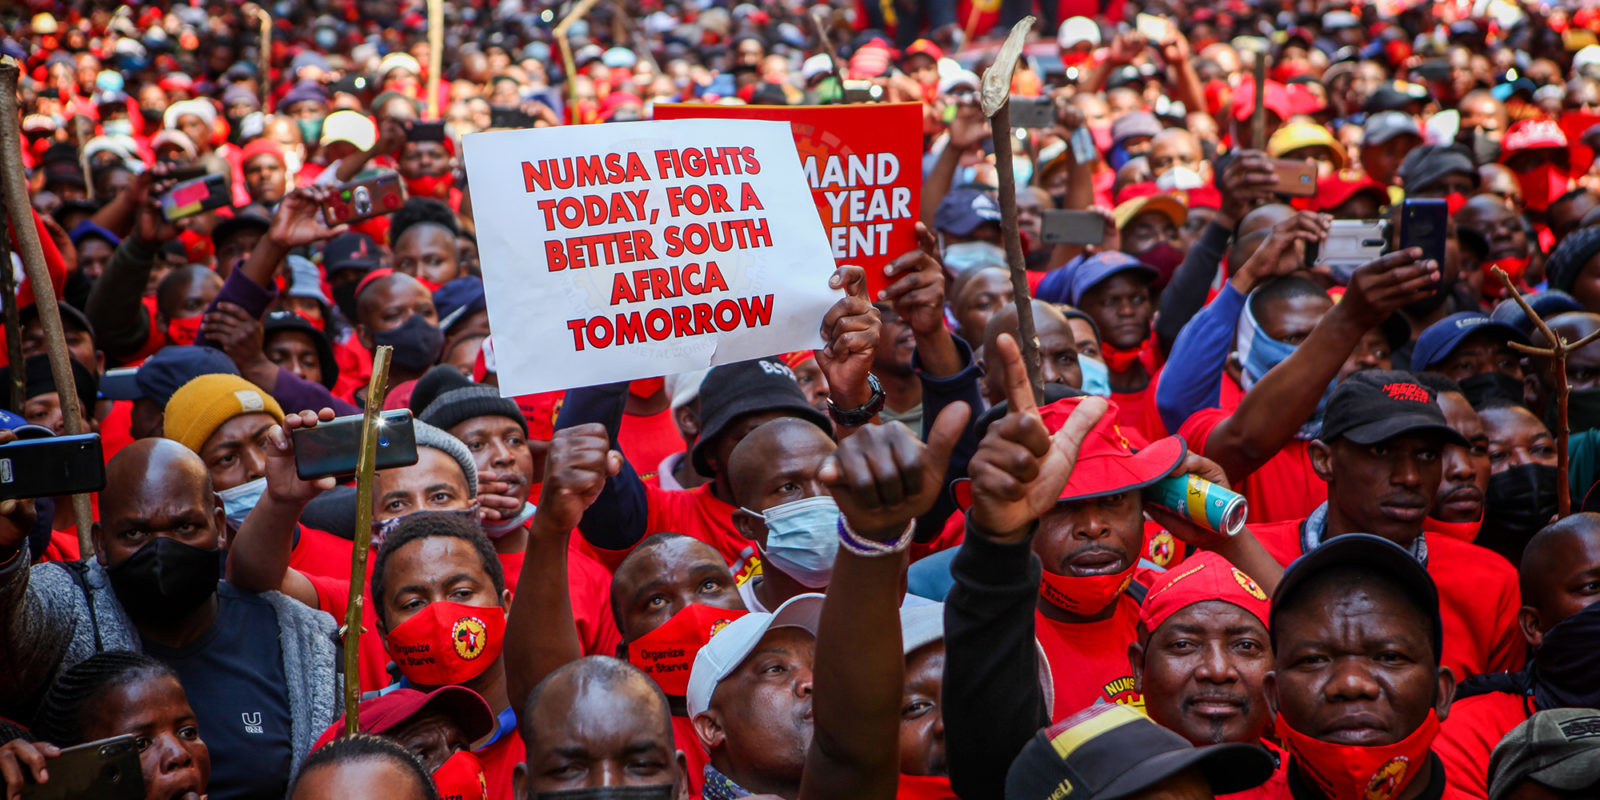 A sea of South African NUMSA workers wearing red t-shirts. A sign says "NUMSA fights today for a better South Africa tomorrow."